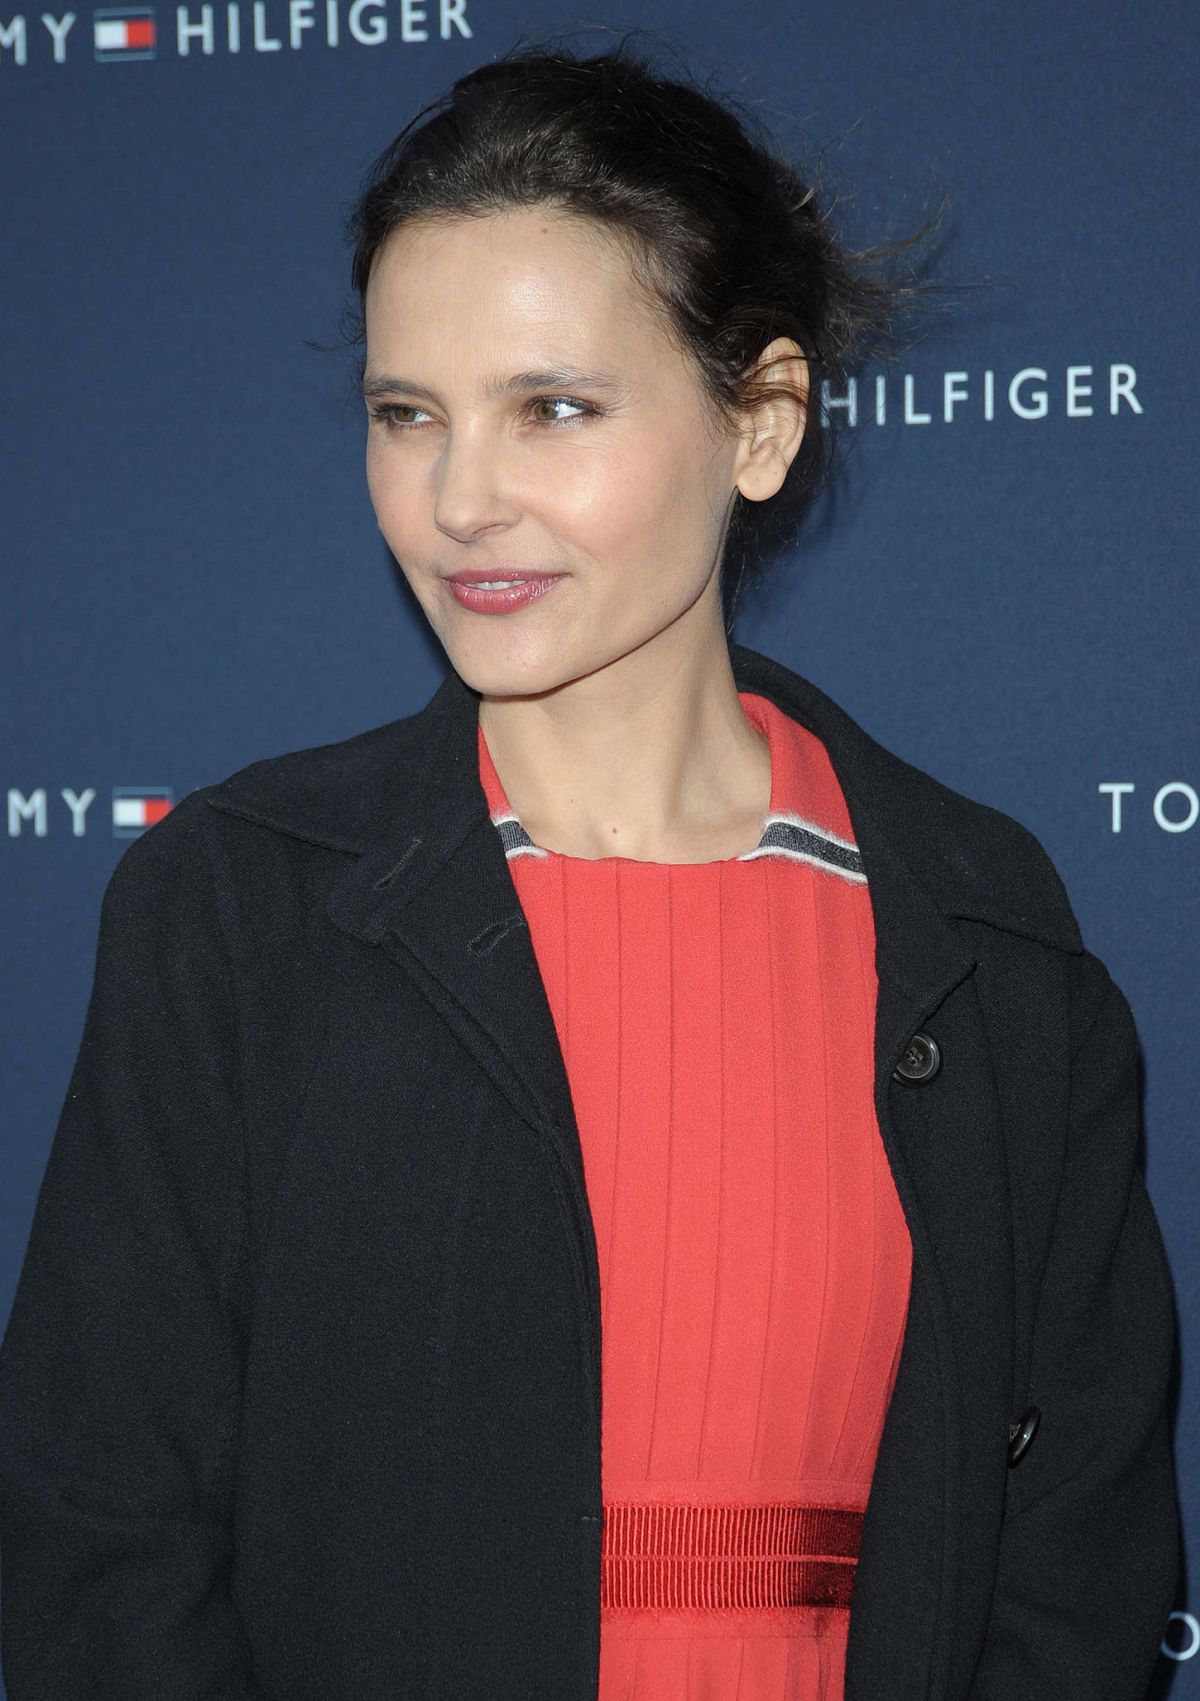 VIRGINIE LEDOYEN at Tommy Hilfiger Boutique Opening in Paris – HawtCelebs